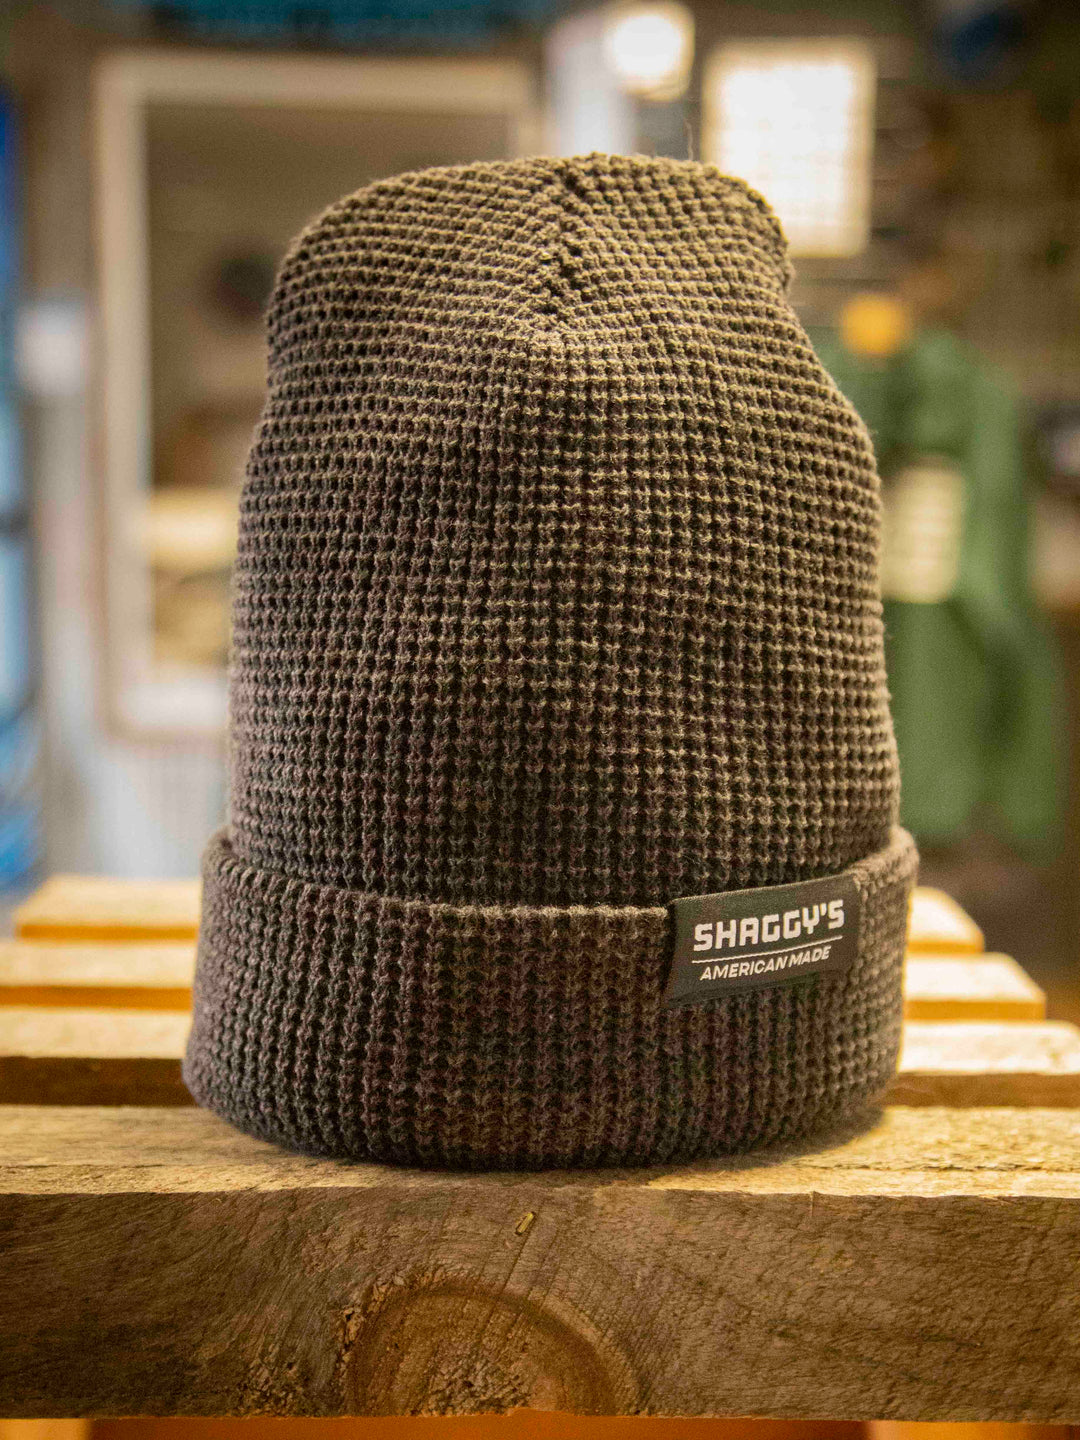 Shaggy's Waffle Knit Cuffed Beanie – Shaggy's Copper Country Skis